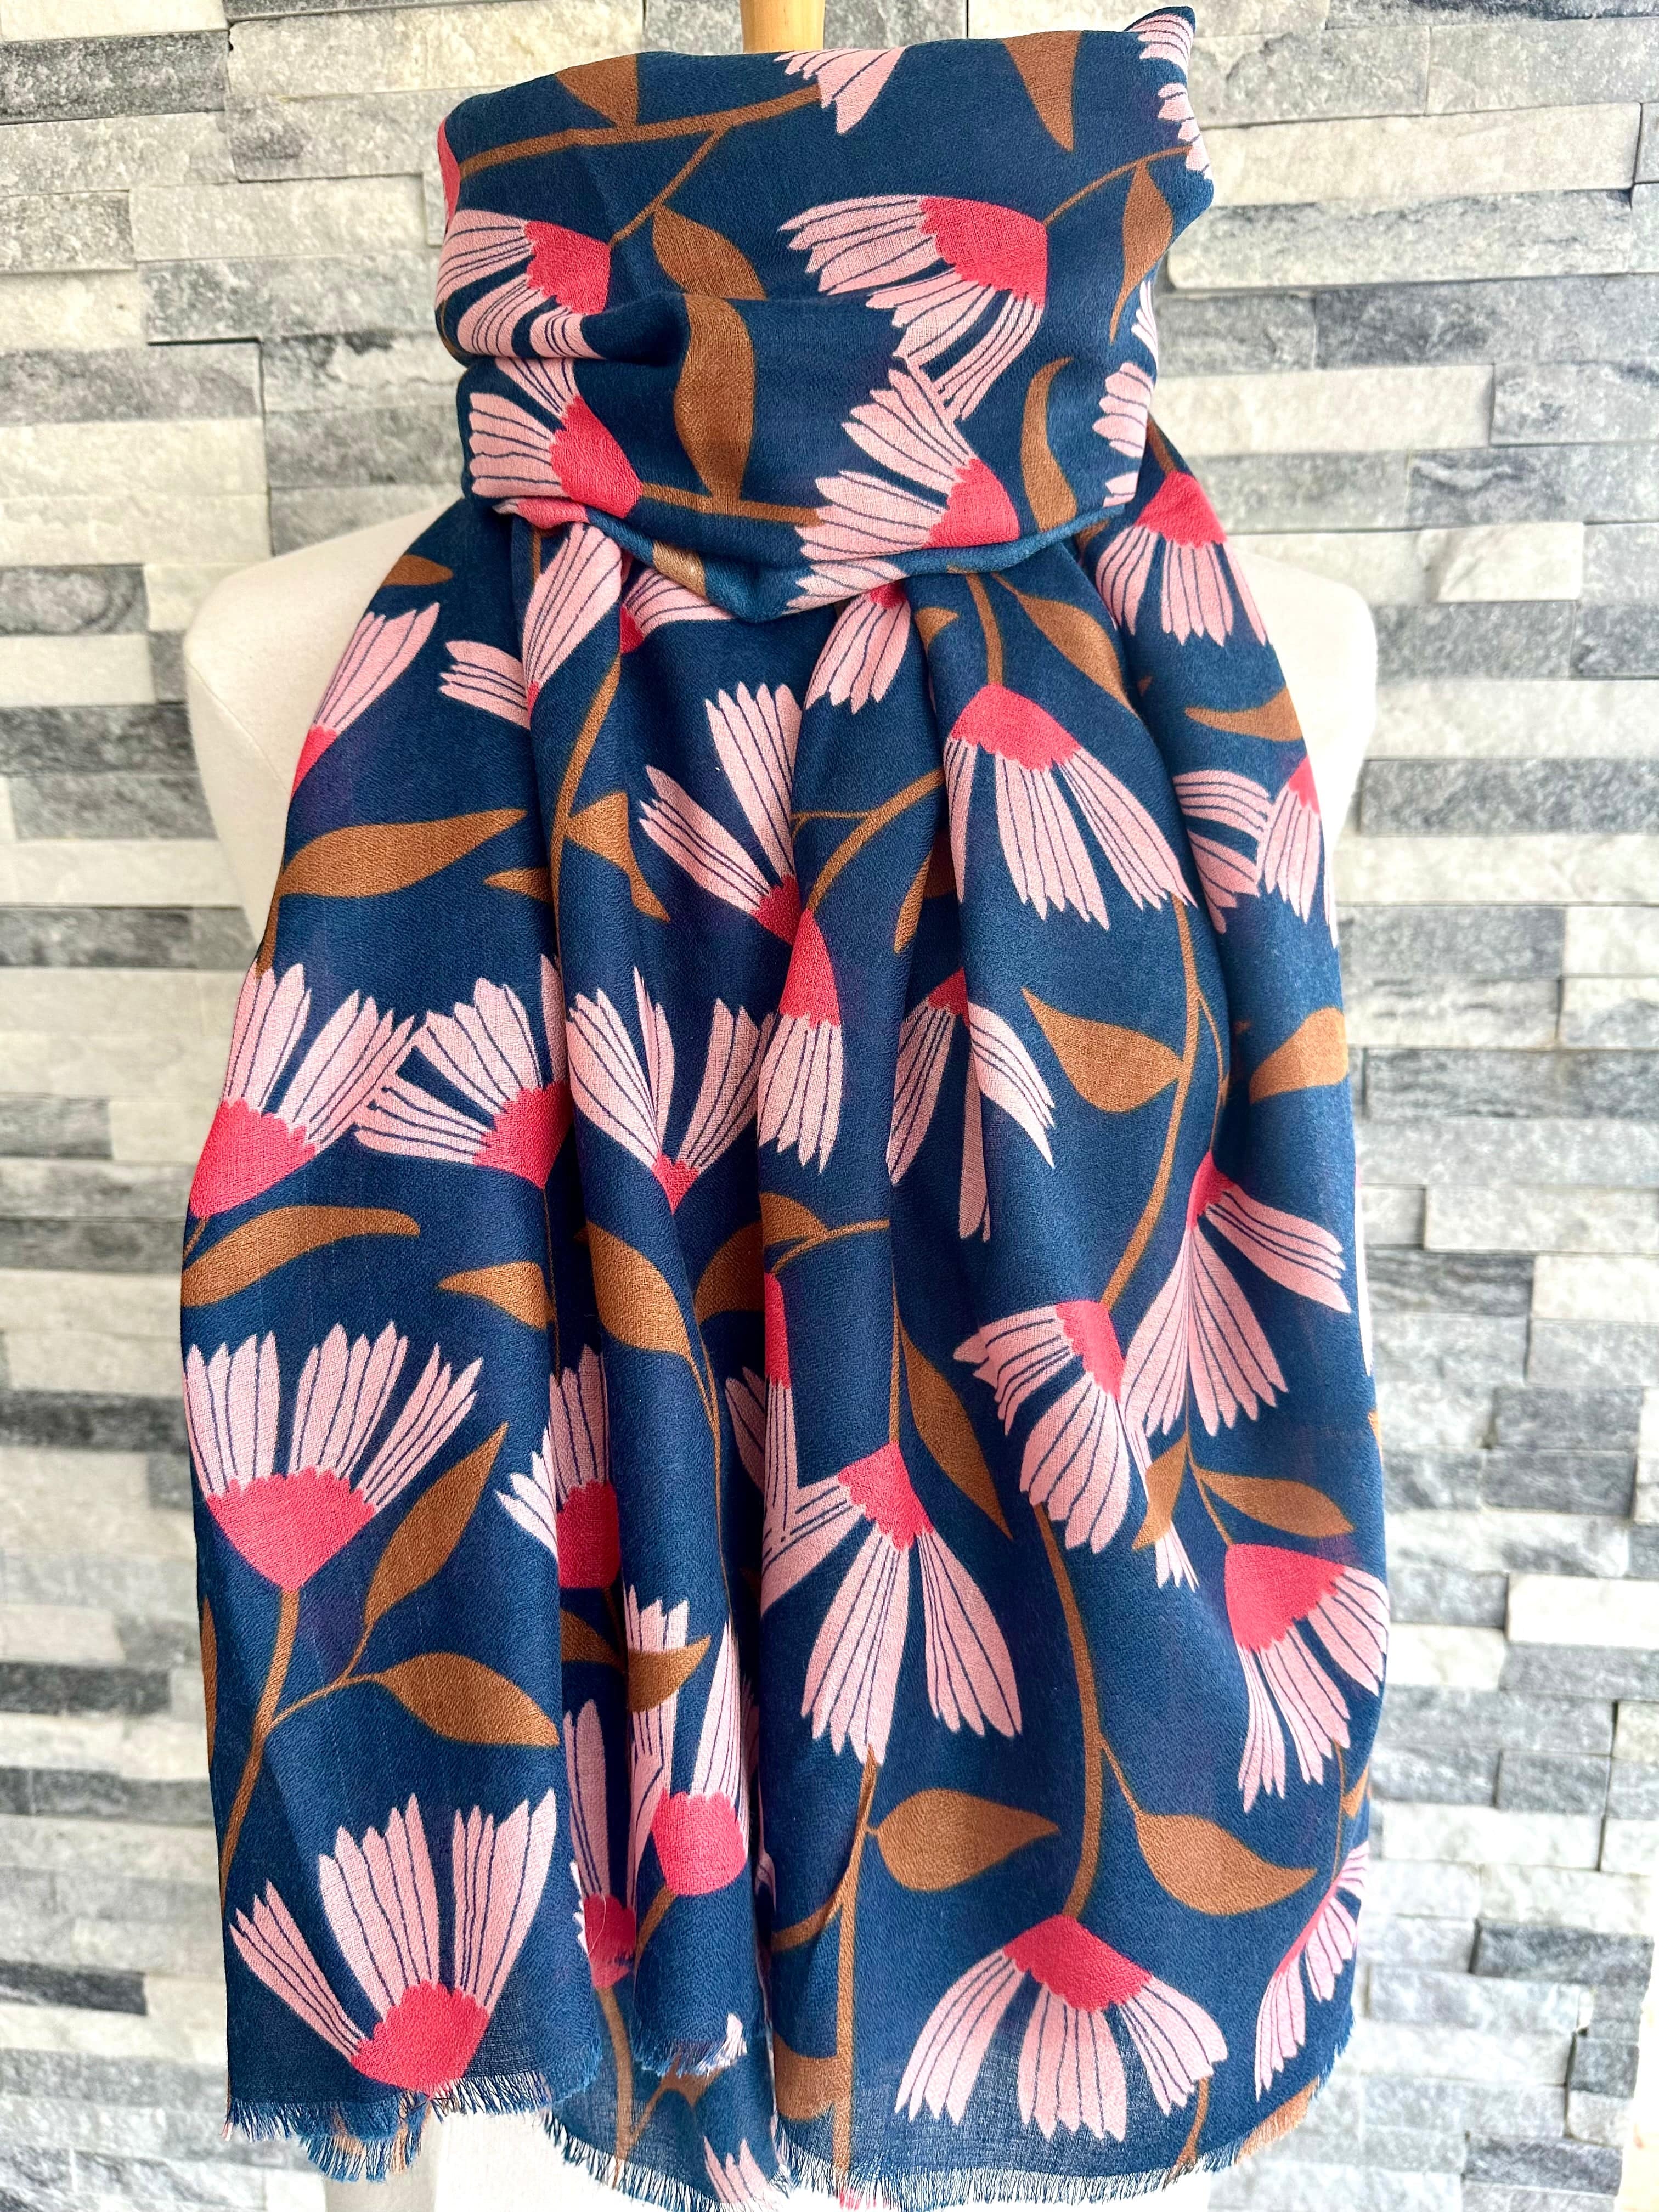 lusciousscarves Red Cuckoo Trailing Flowers Design Scarf , Navy, Pink and Tan.